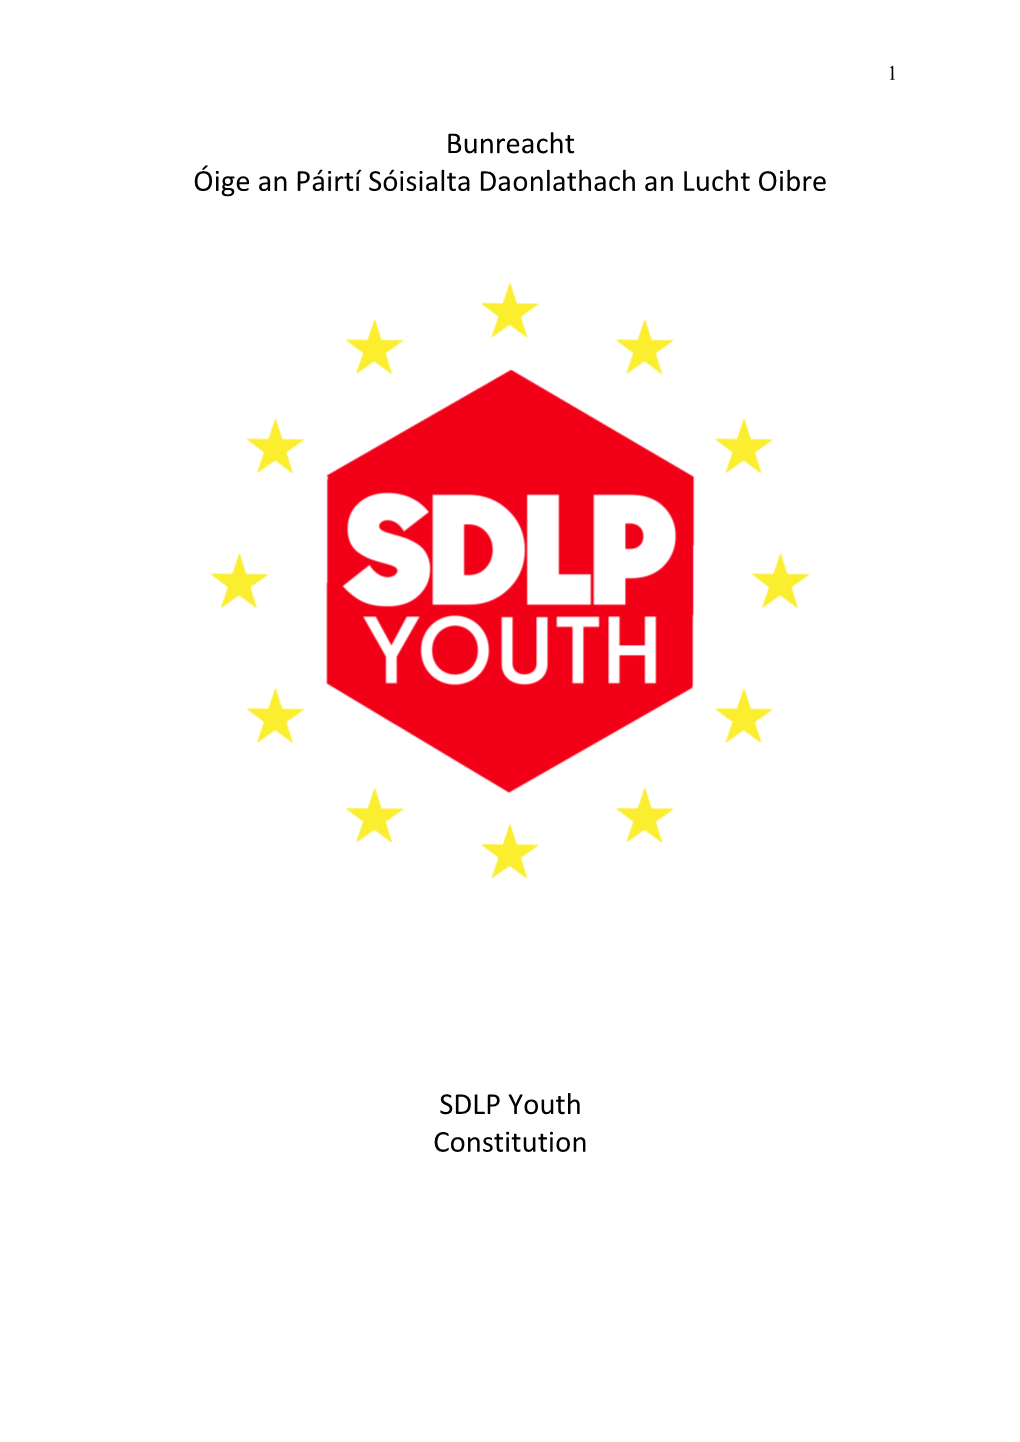 SDLP Youth Constitution